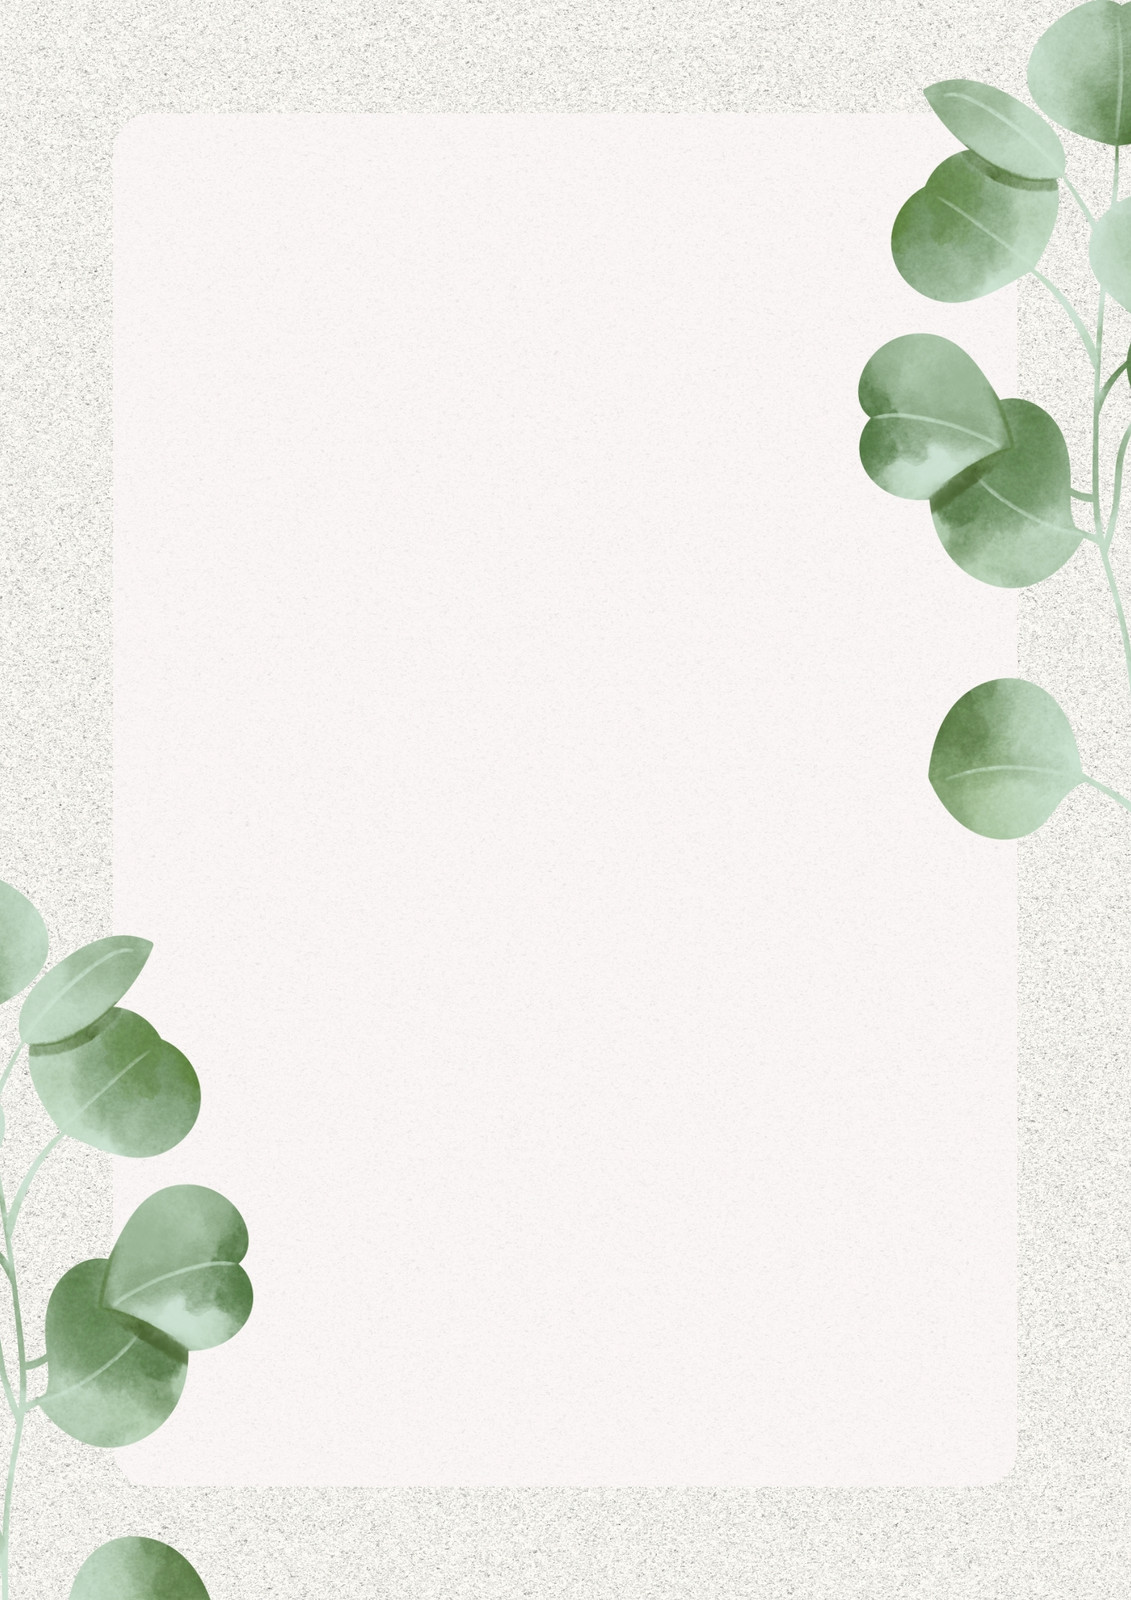 Free and customizable leaf templates